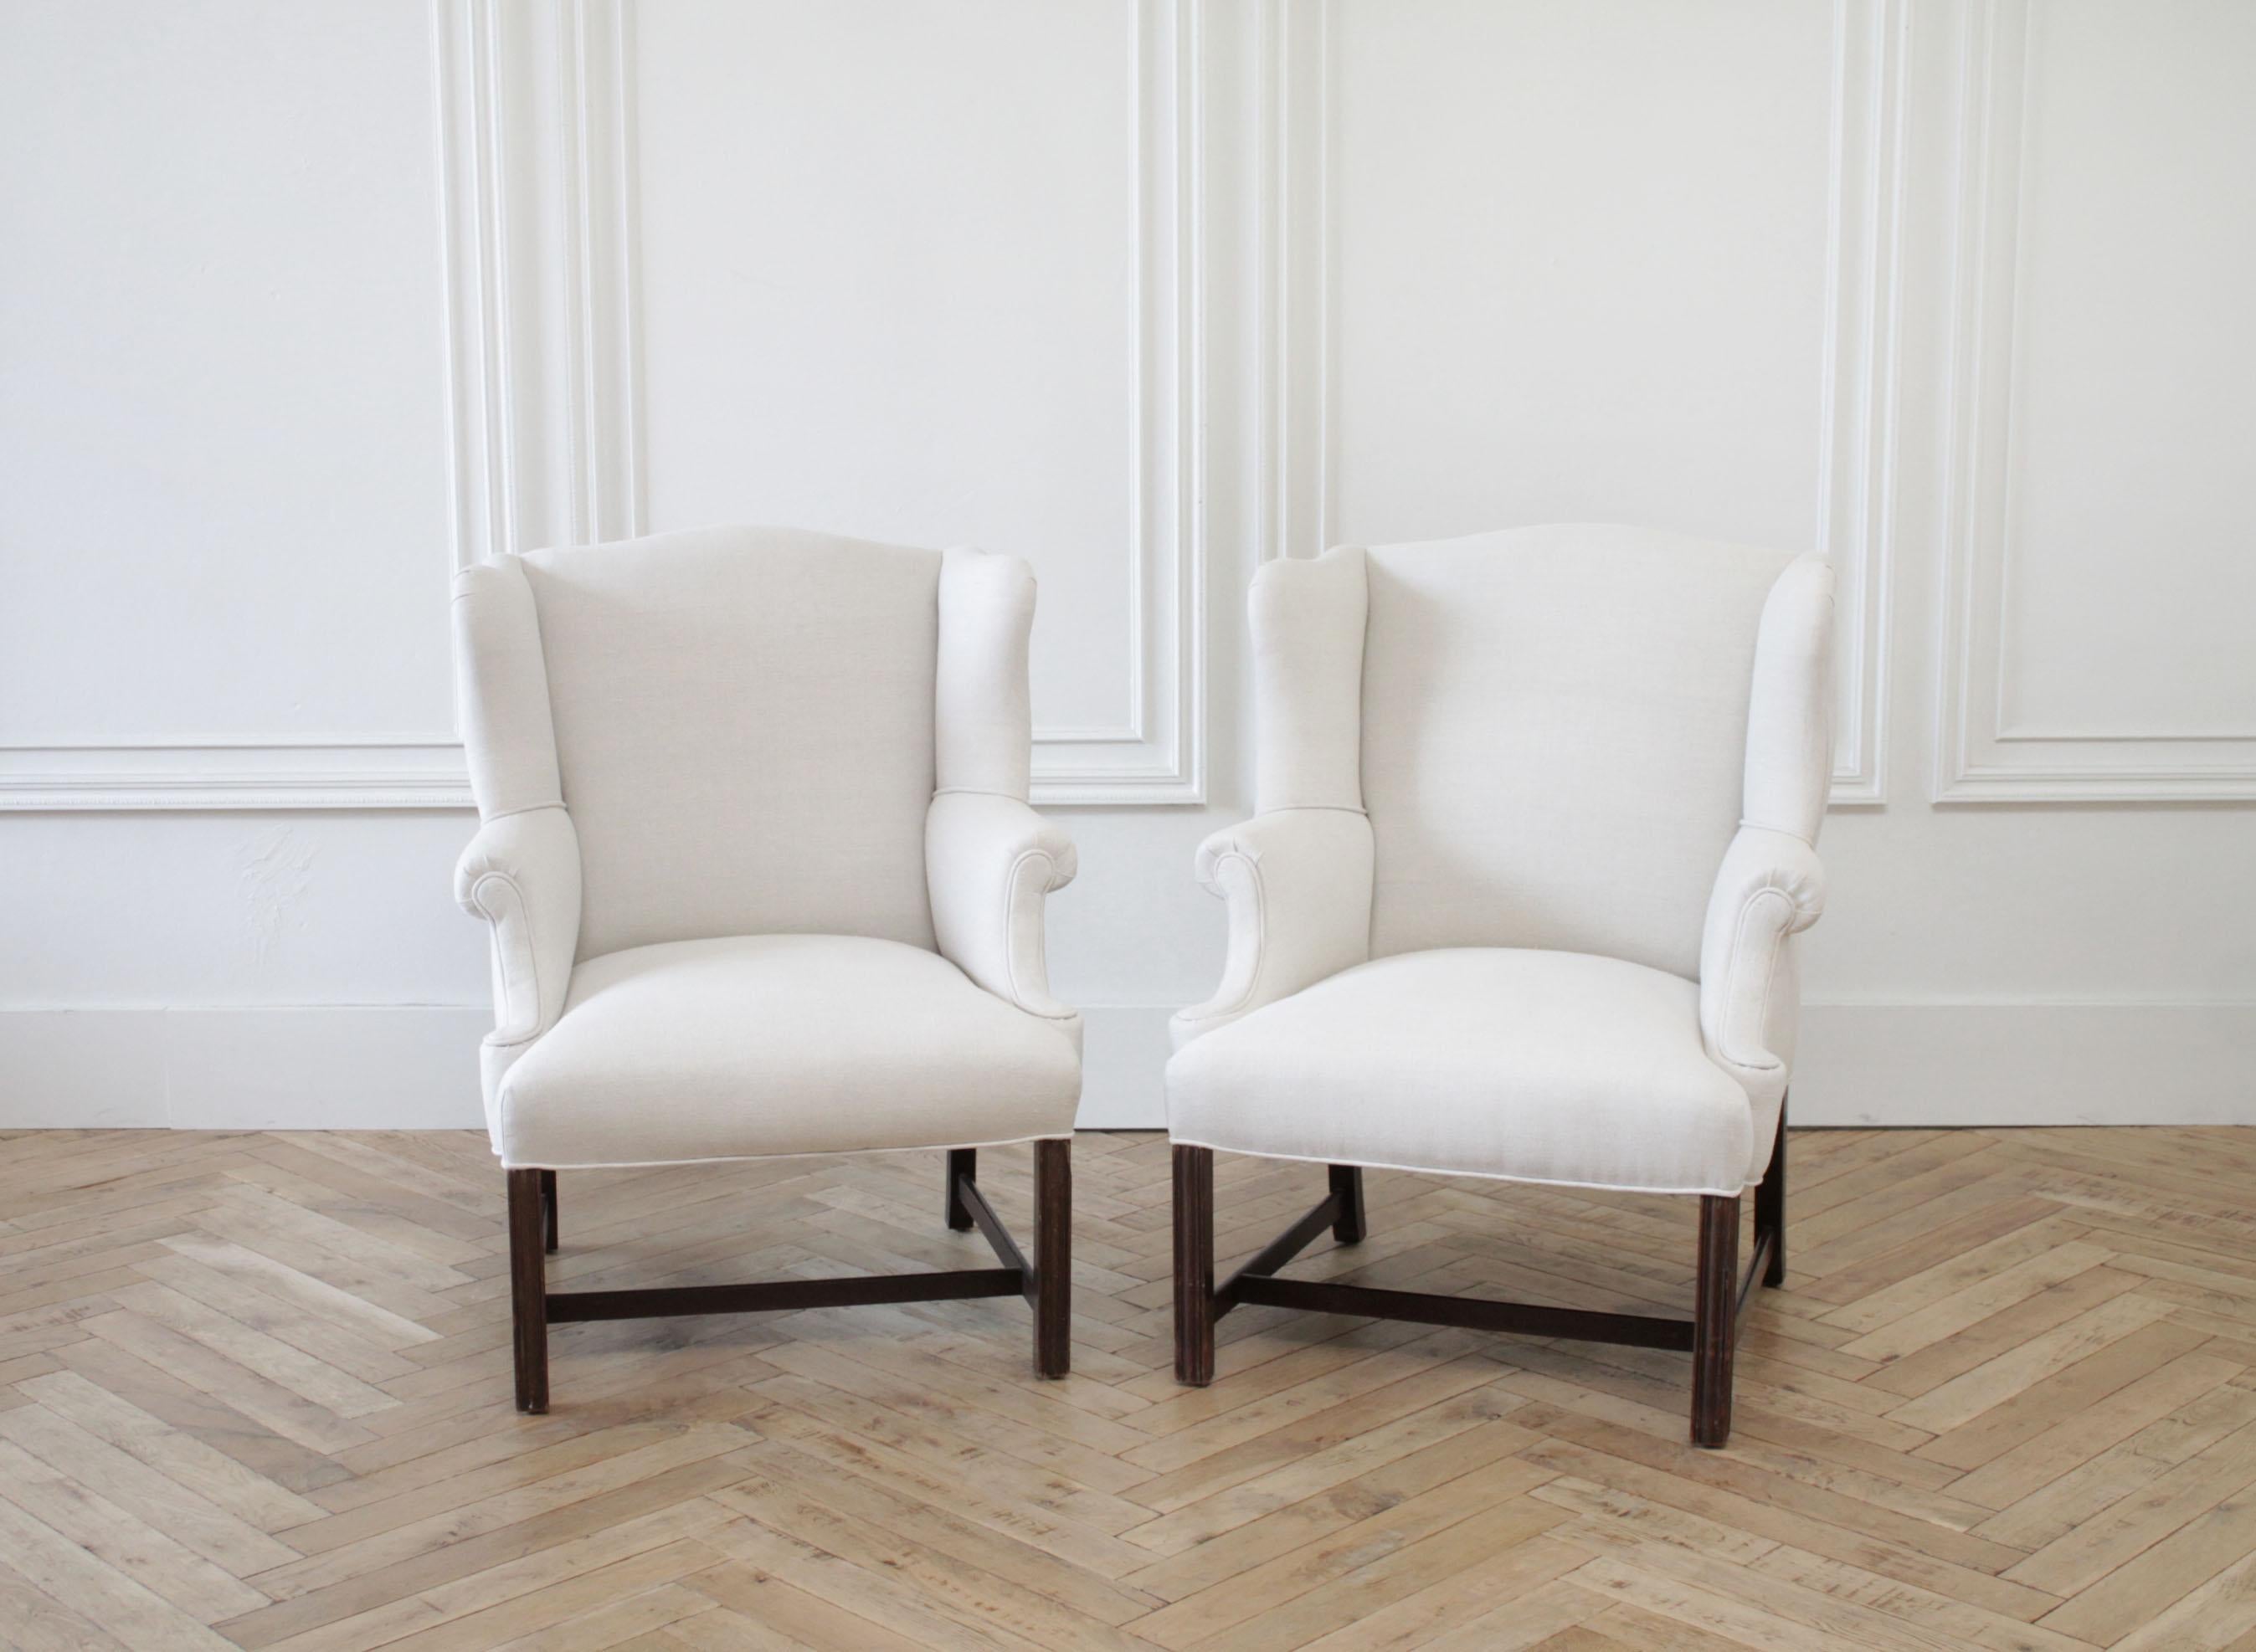 Pair of vintage wing chairs in natural linen
Wood legs are solid and sturdy, ready for everyday use. These chairs are more petite, perfect for any room. 100% pure Belgian linen. New upholstery.
Size: 29